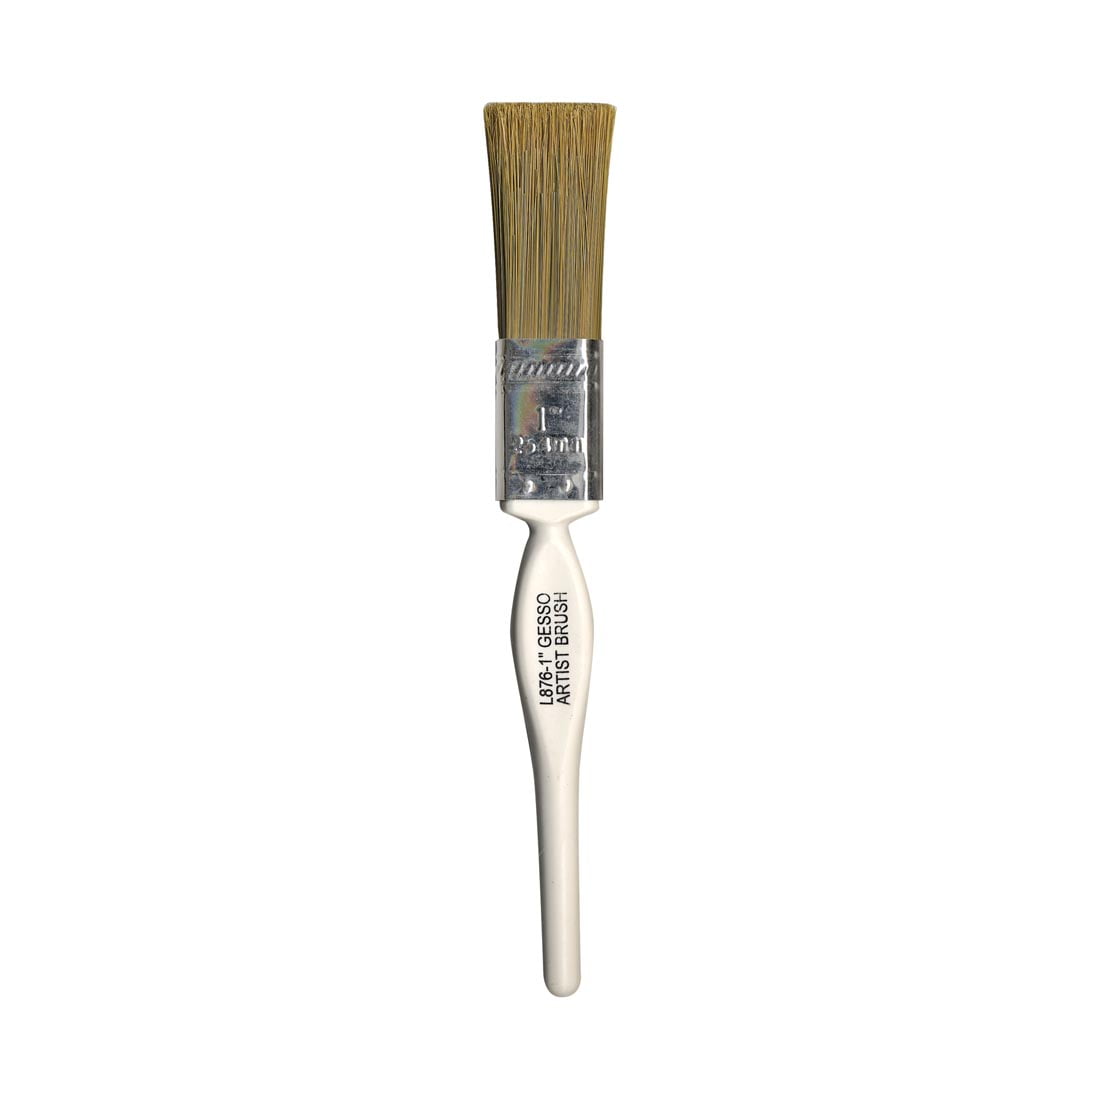 Touch Up Paint Brushes, 100 Pack of 2.5mm Disposable Micro